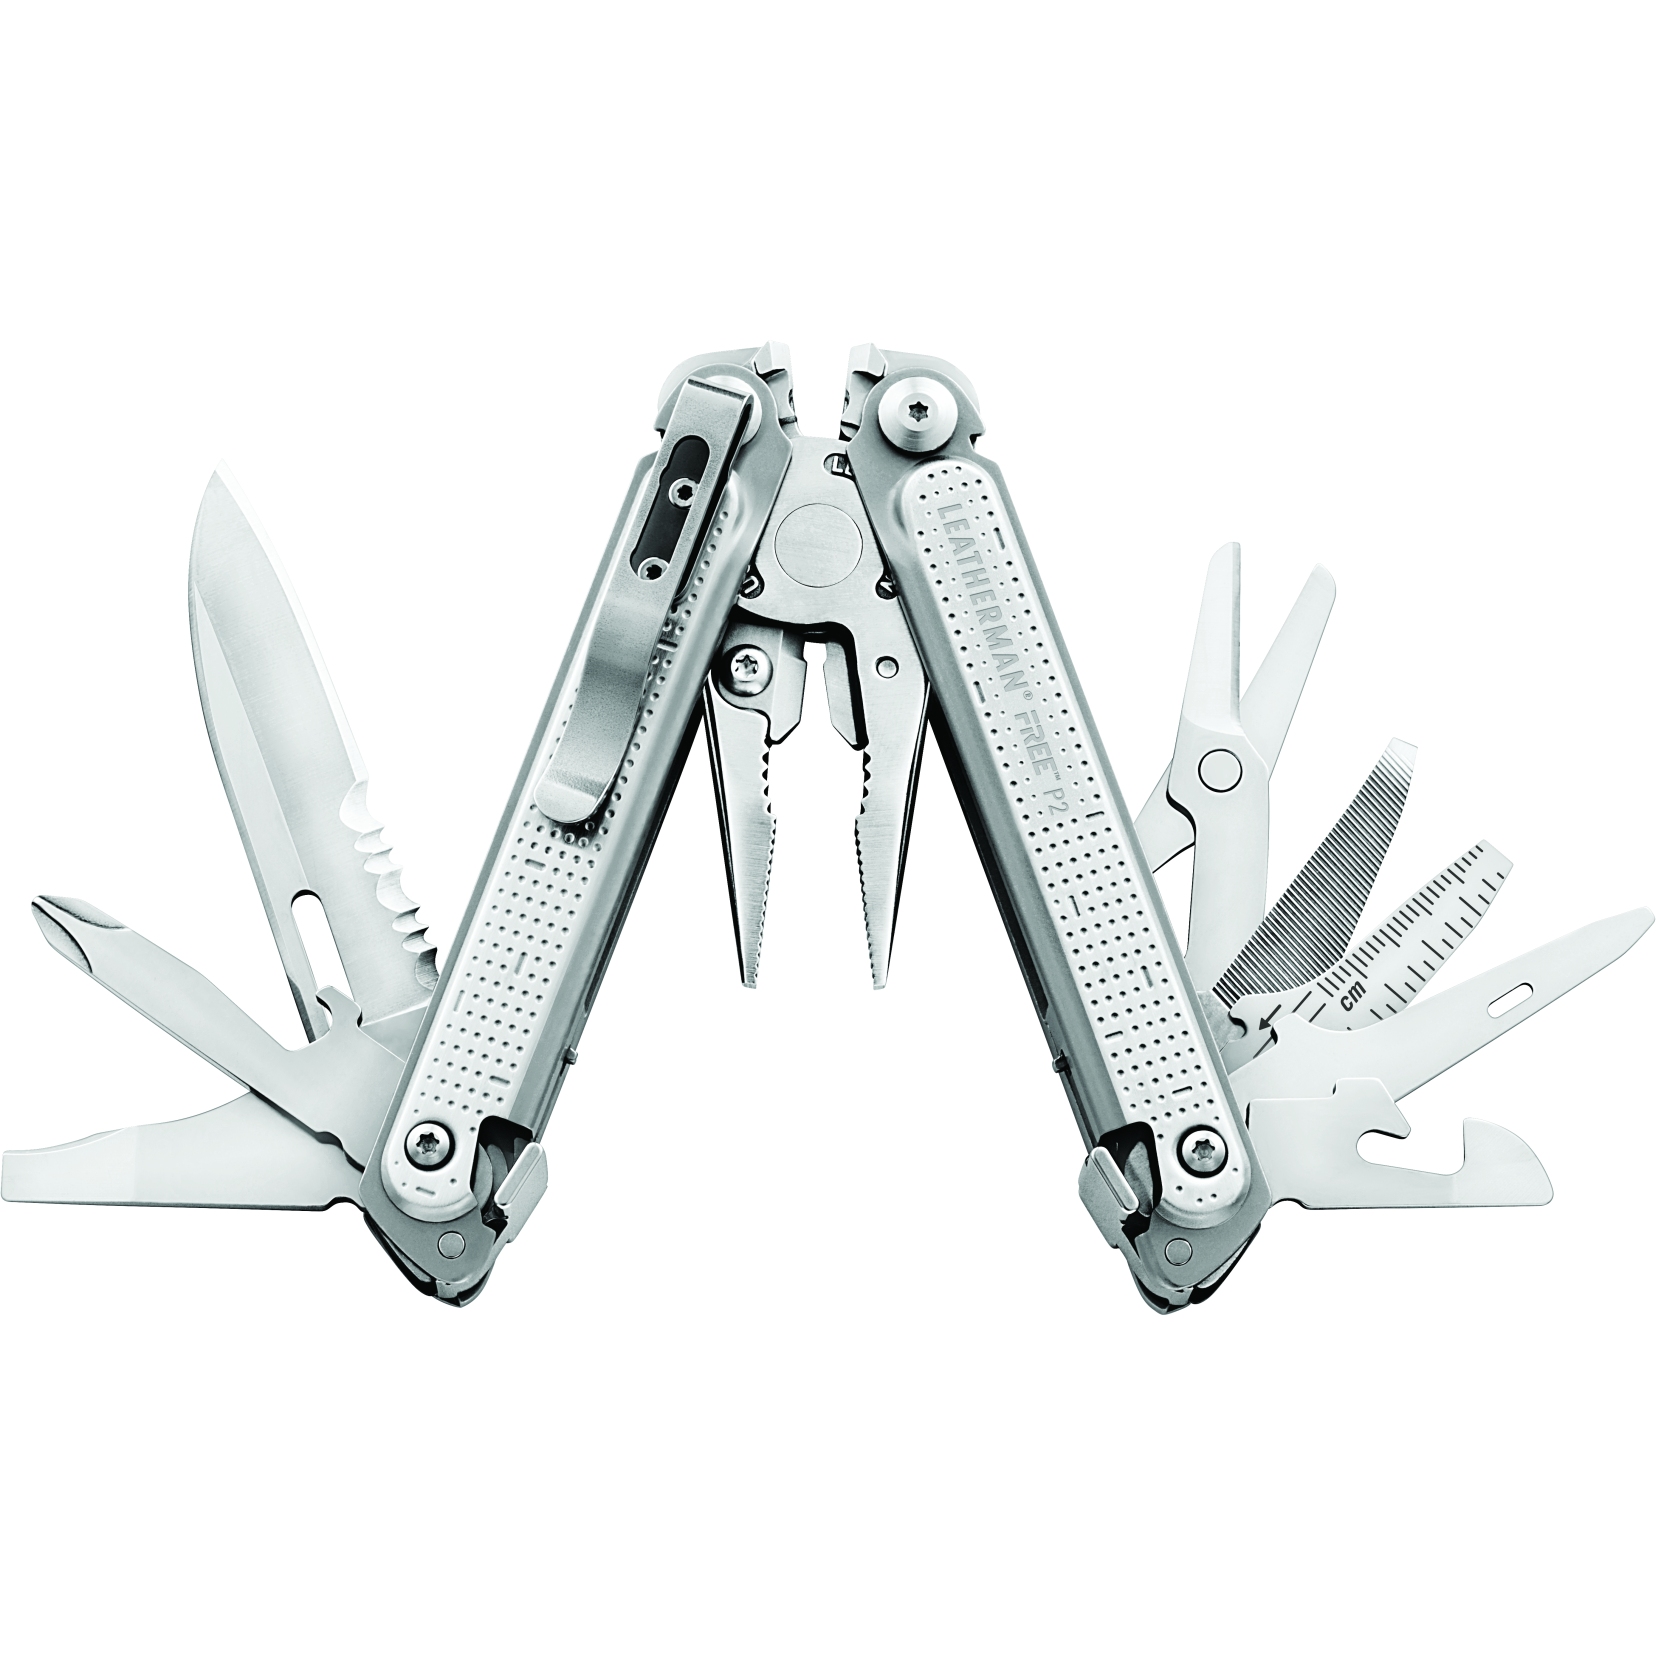 Picture of Leatherman Free P2 Multitool - Stainless